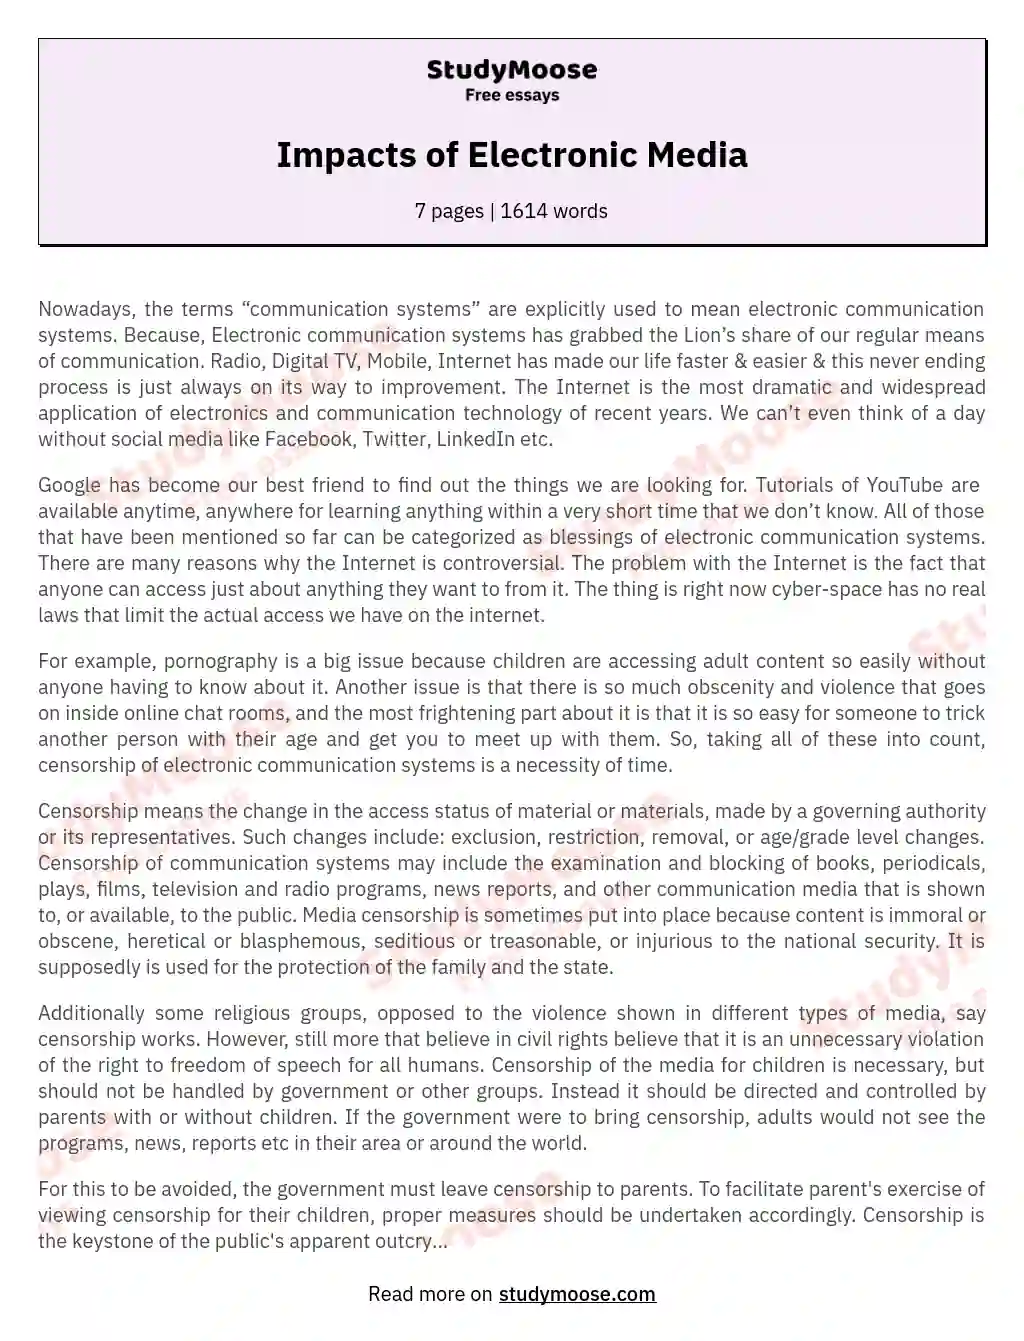 Impacts of Electronic Media essay